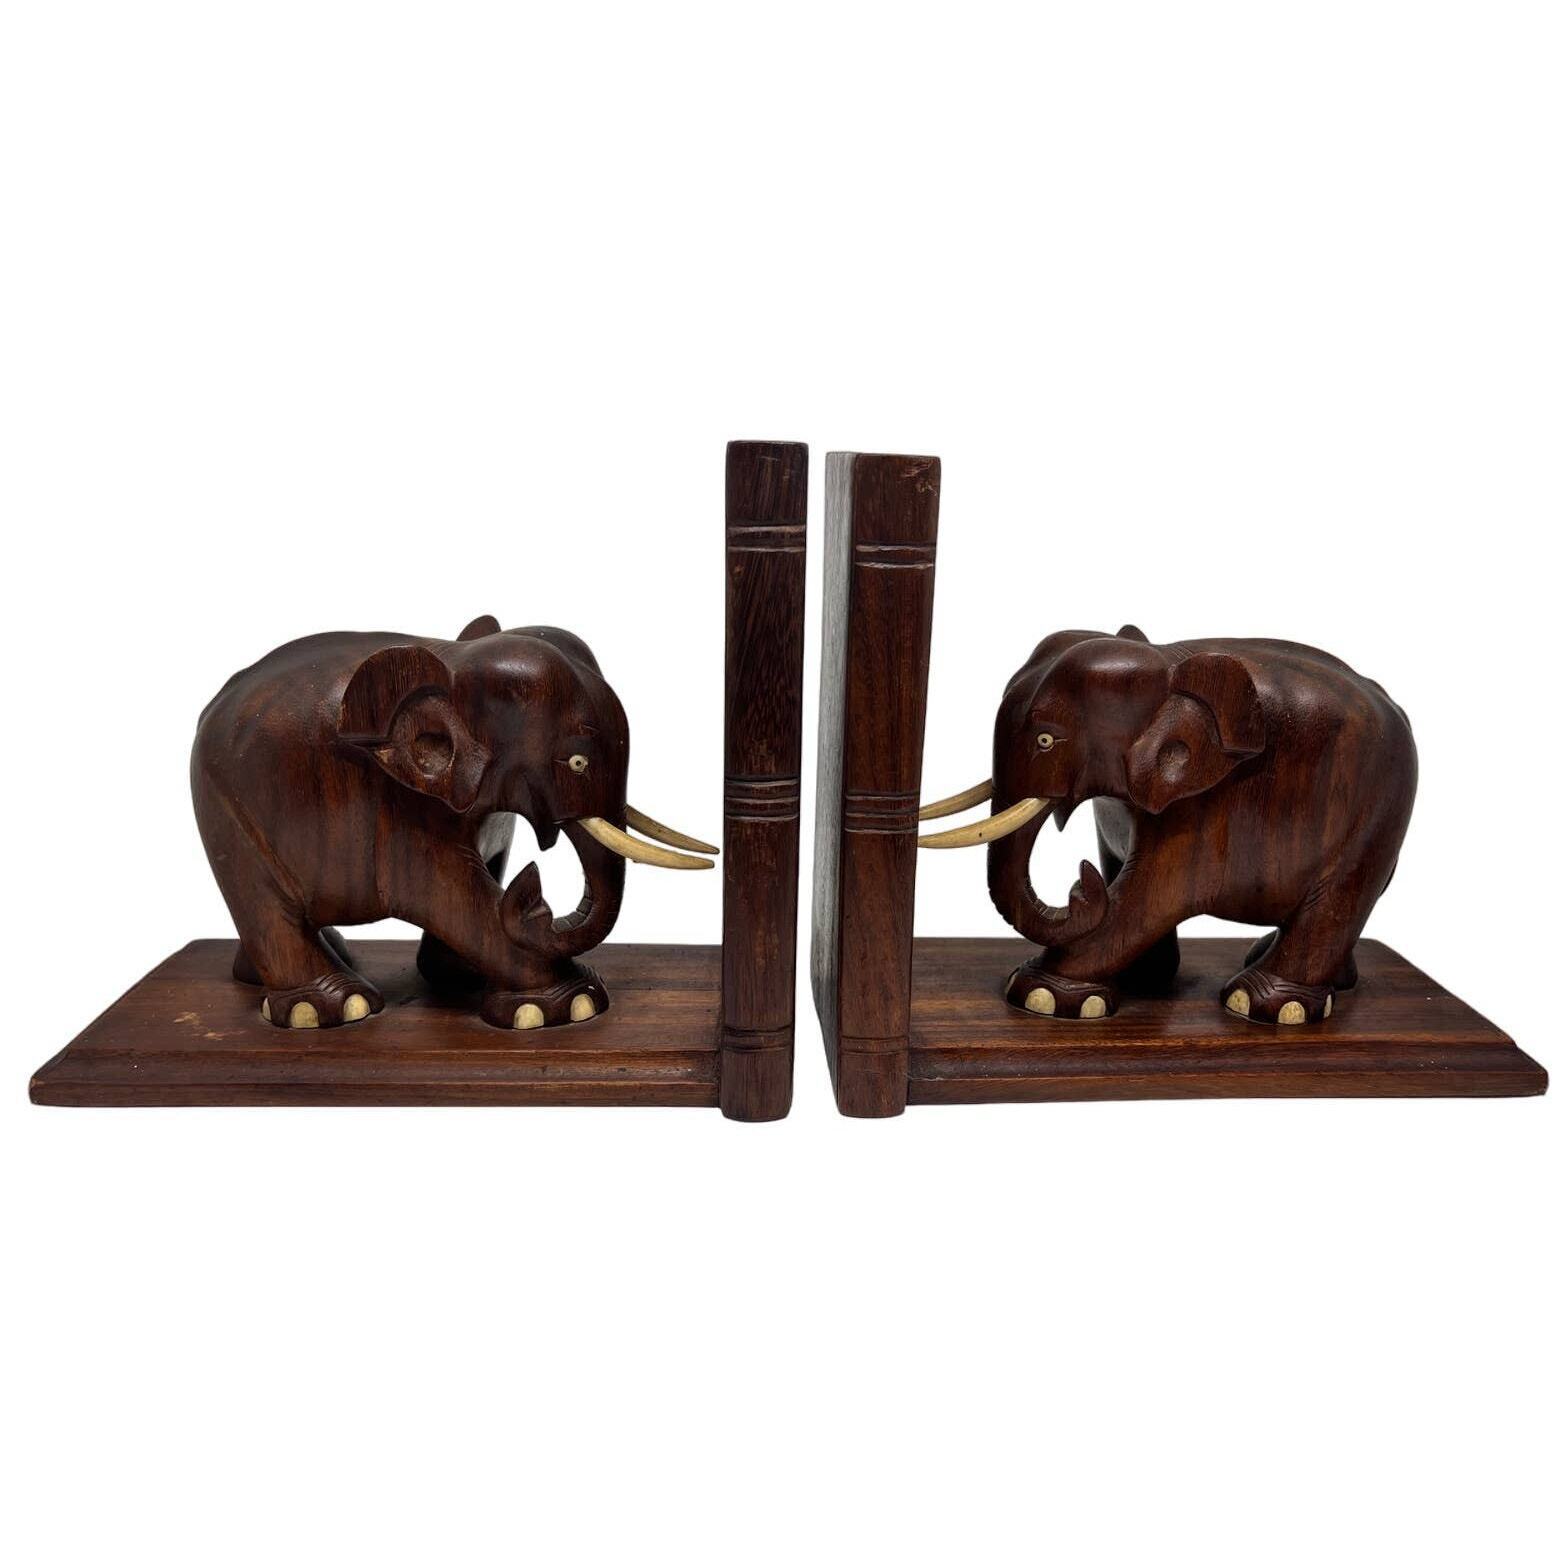  Vintage Wooden Bookends Hand Carved Elephant Bookends